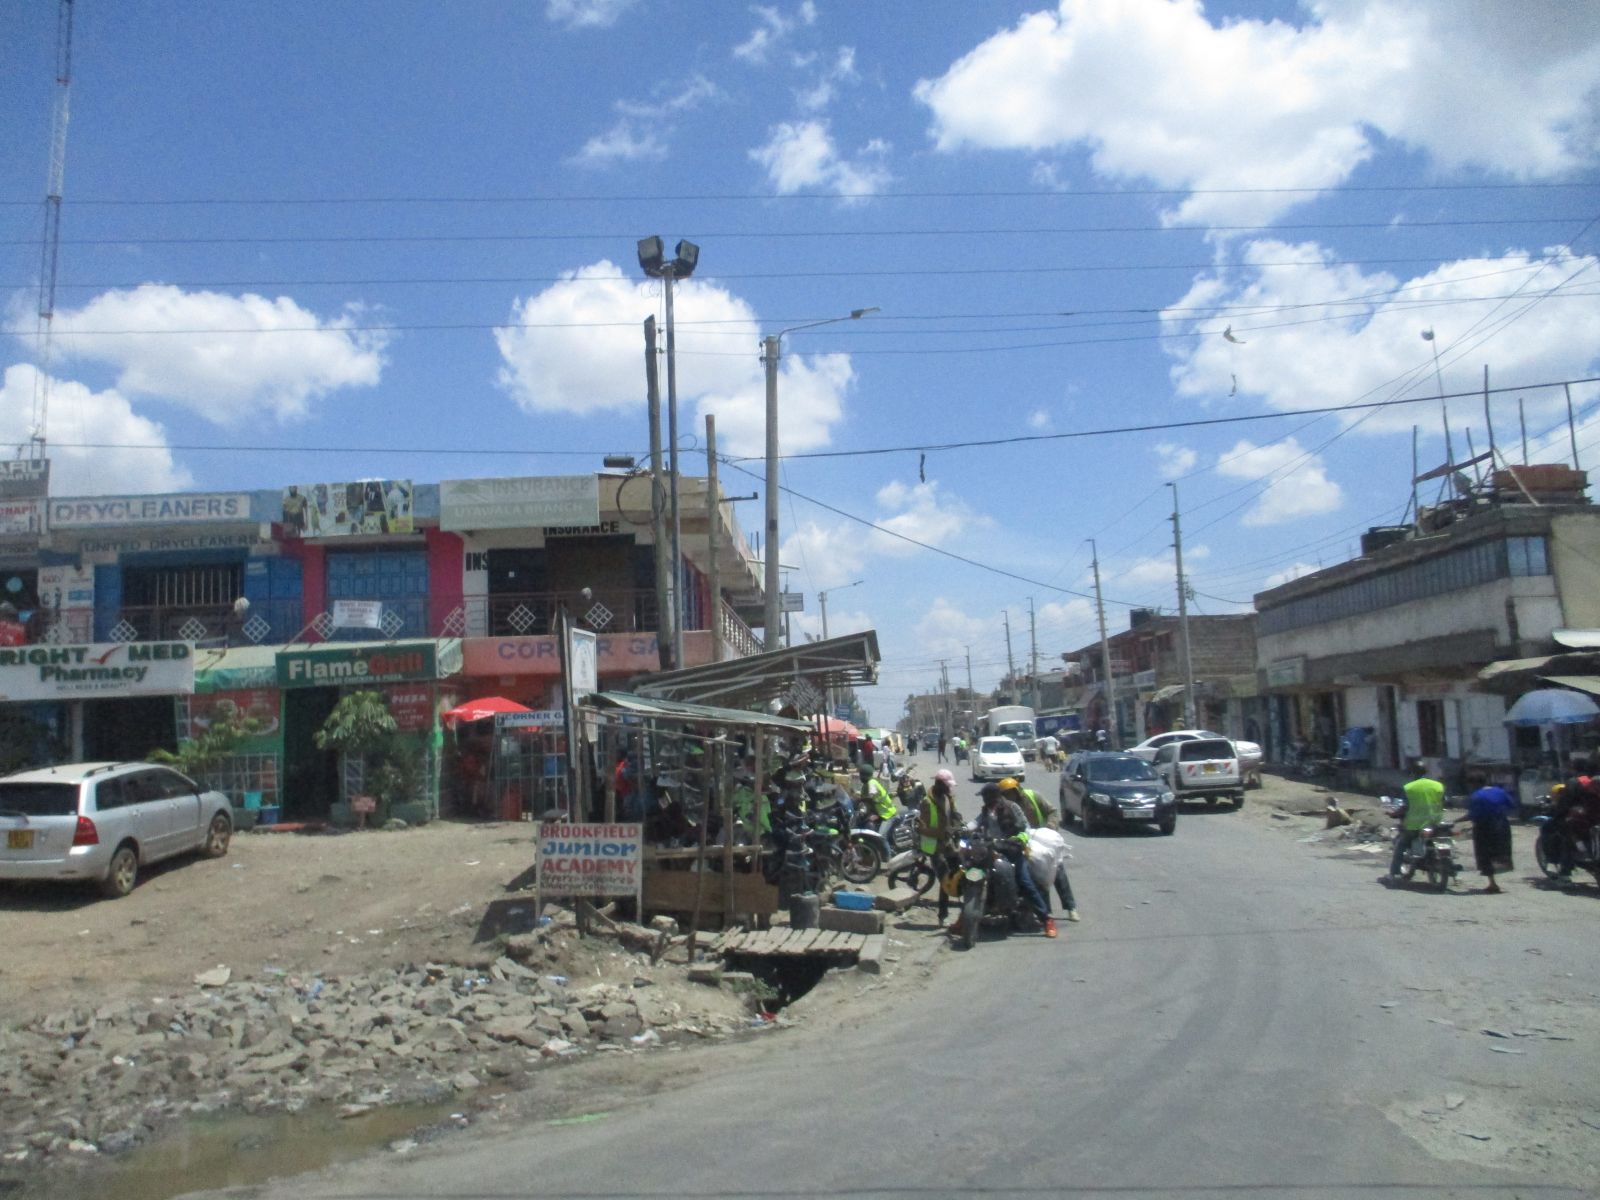 Infrastructure in the Nairobi agglomeration mostly facilitates motorised traffic.